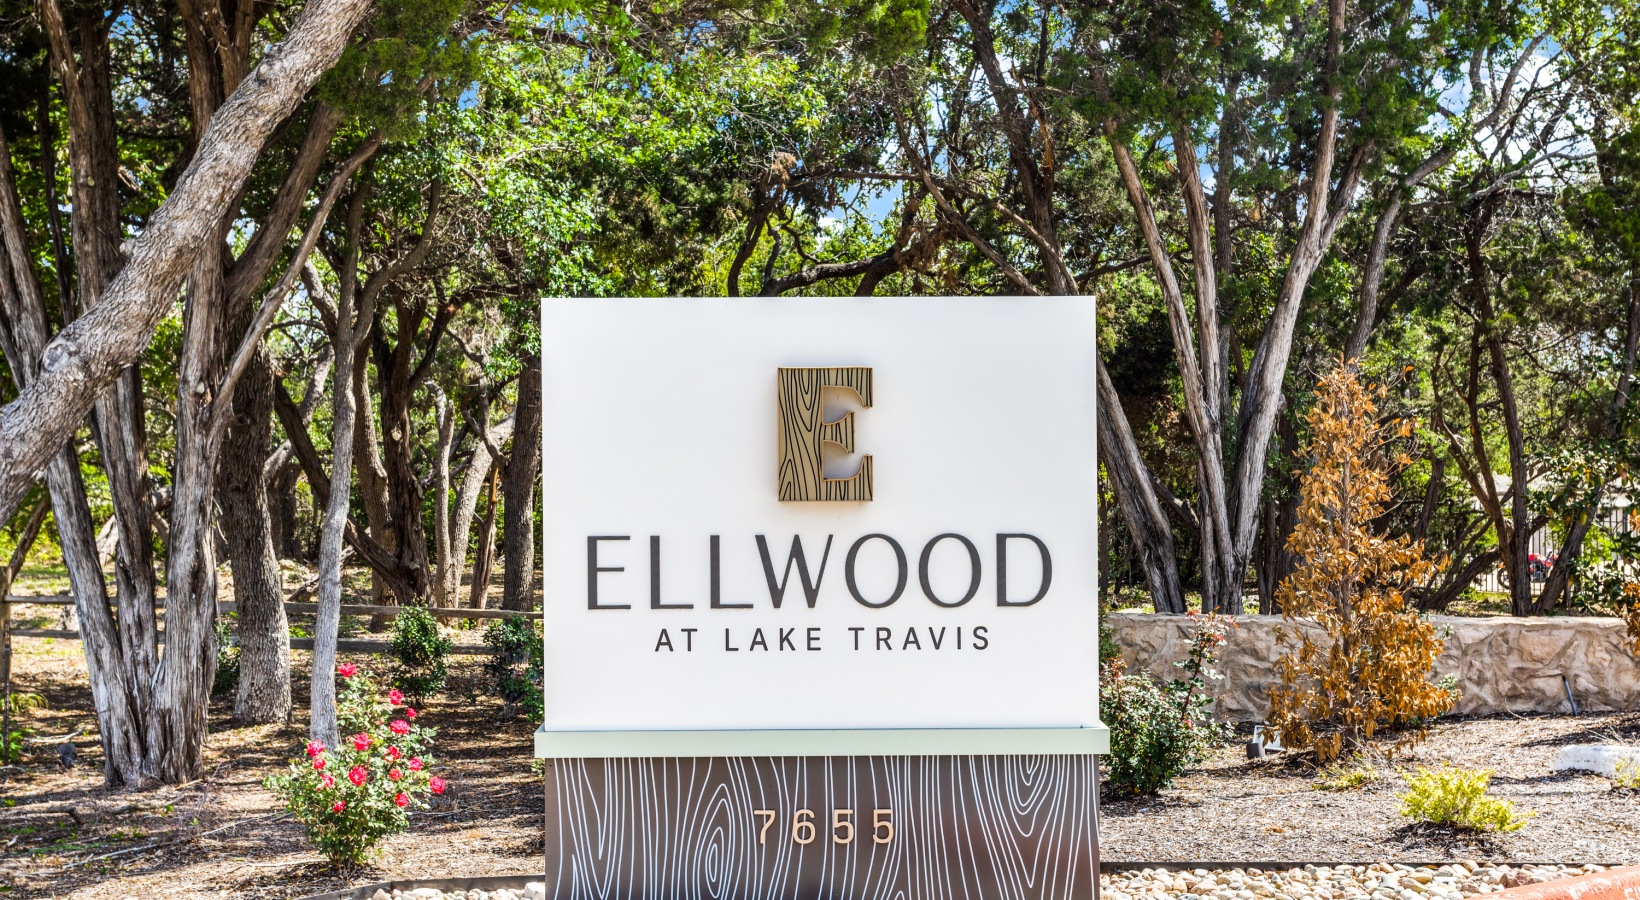 the sign for elwood at The Ellwood at Lake Travis